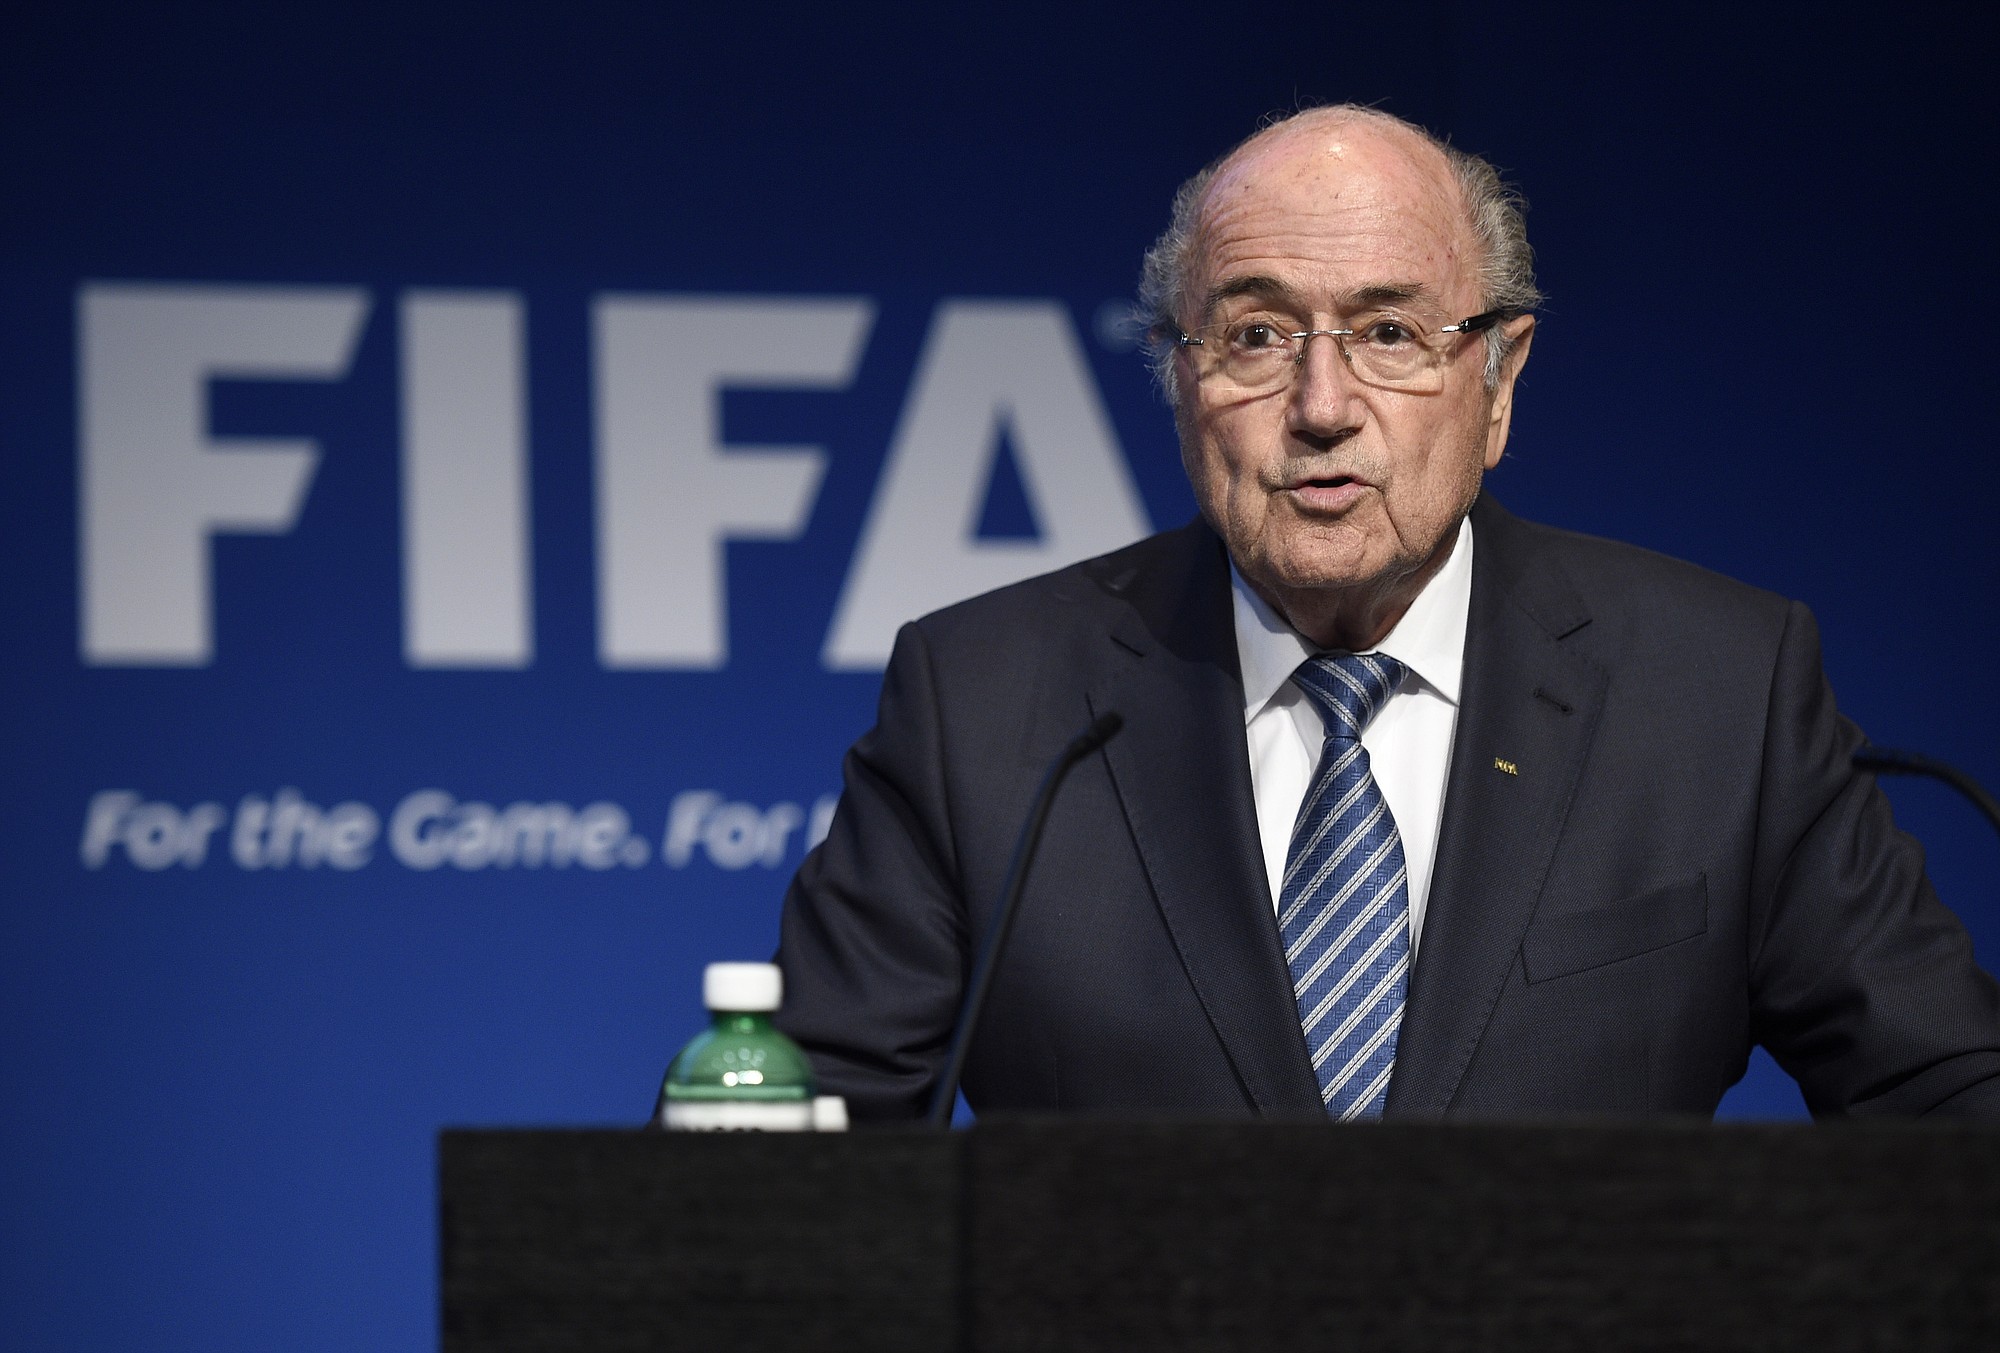 FIFA President Sepp Blatter speaks during a press conference at the FIFA headquarters in Zurich, Switzerland, on Tuesday.